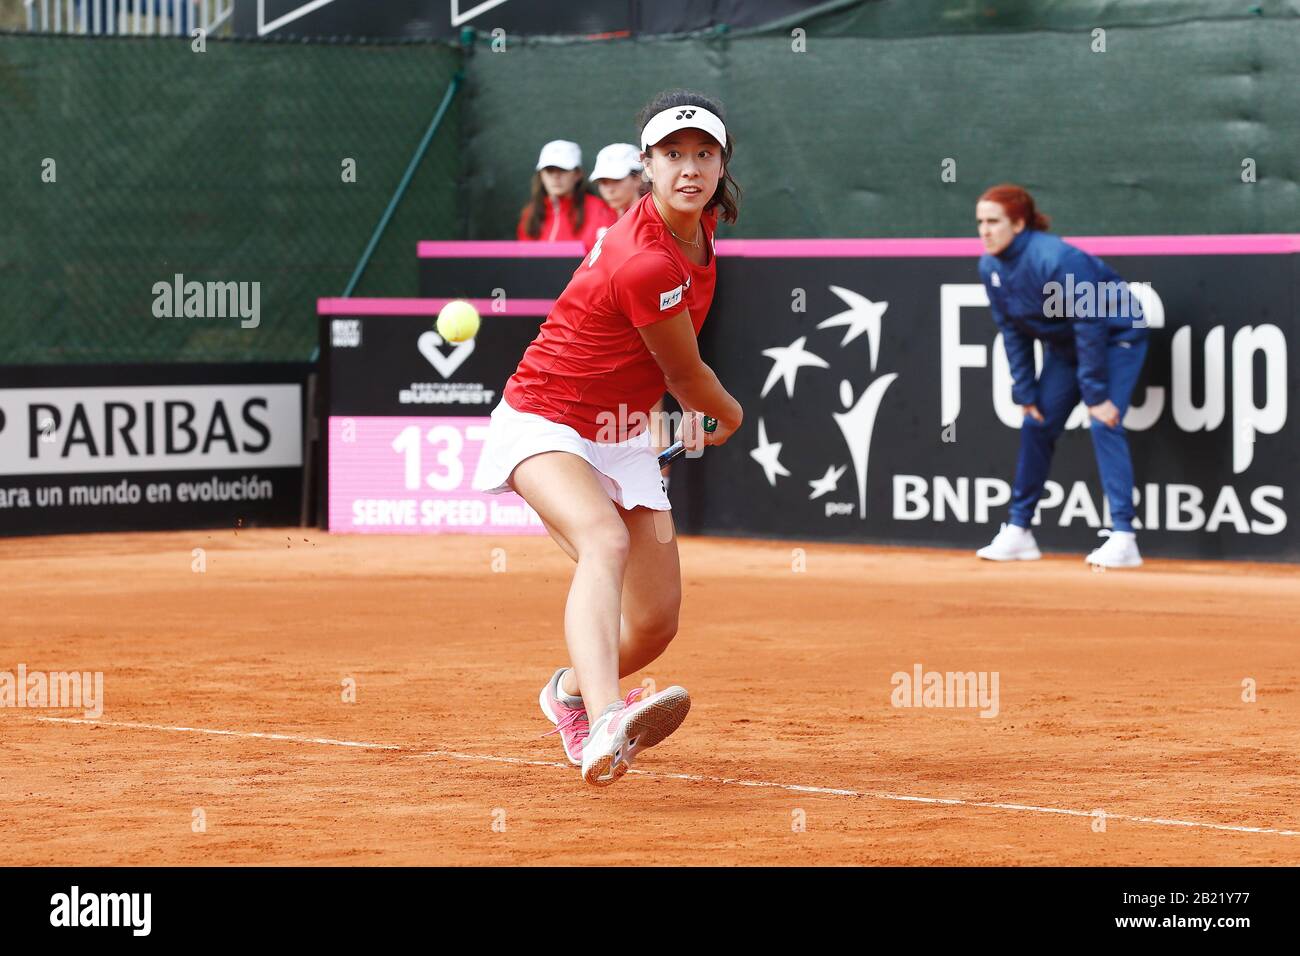 Cartagena, Spain. 8th Feb, 2020. Ena Shibahara (JPN) Tennis : Ena Shibahara  of Japan during Doubles match against Spain pair on the ITF Fed Cup by BNP  Paribas Qualifiers for Final at